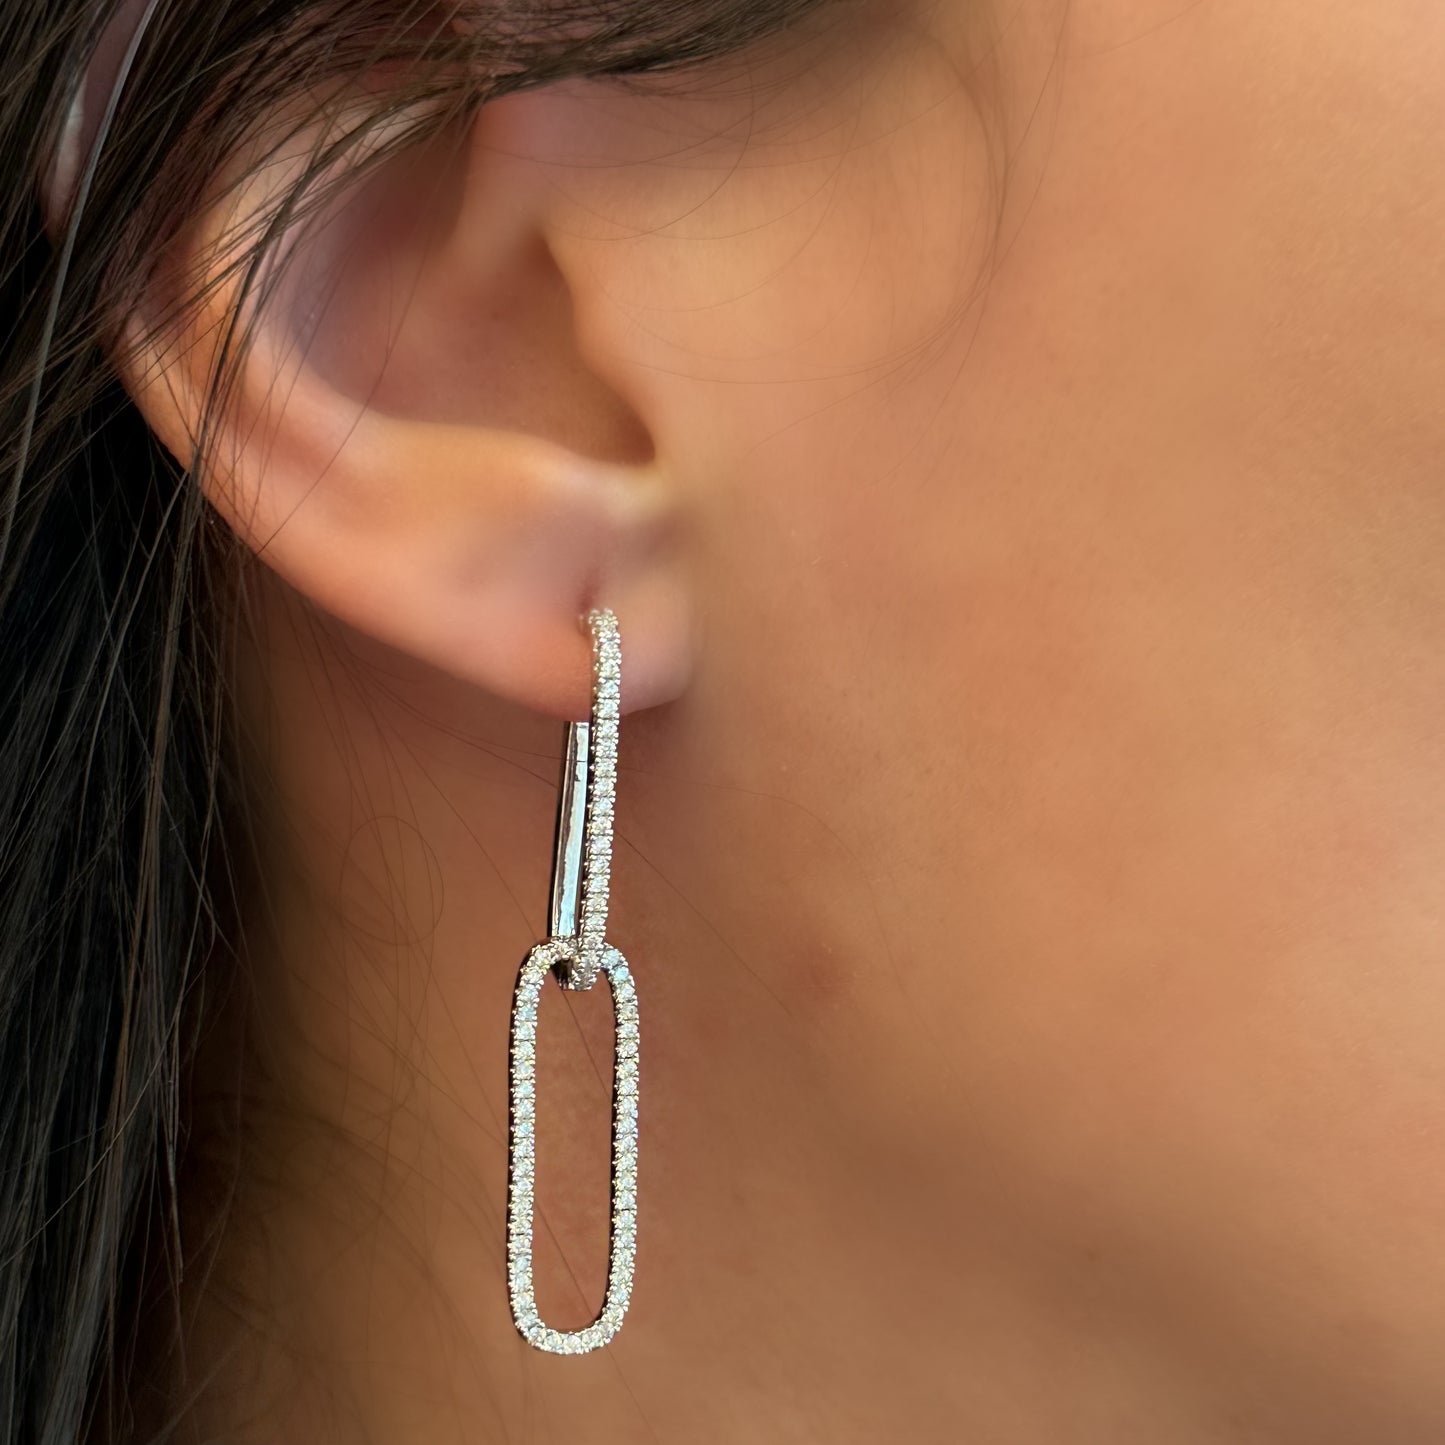 UNIQUE EARRINGS | White Rhodium Plated